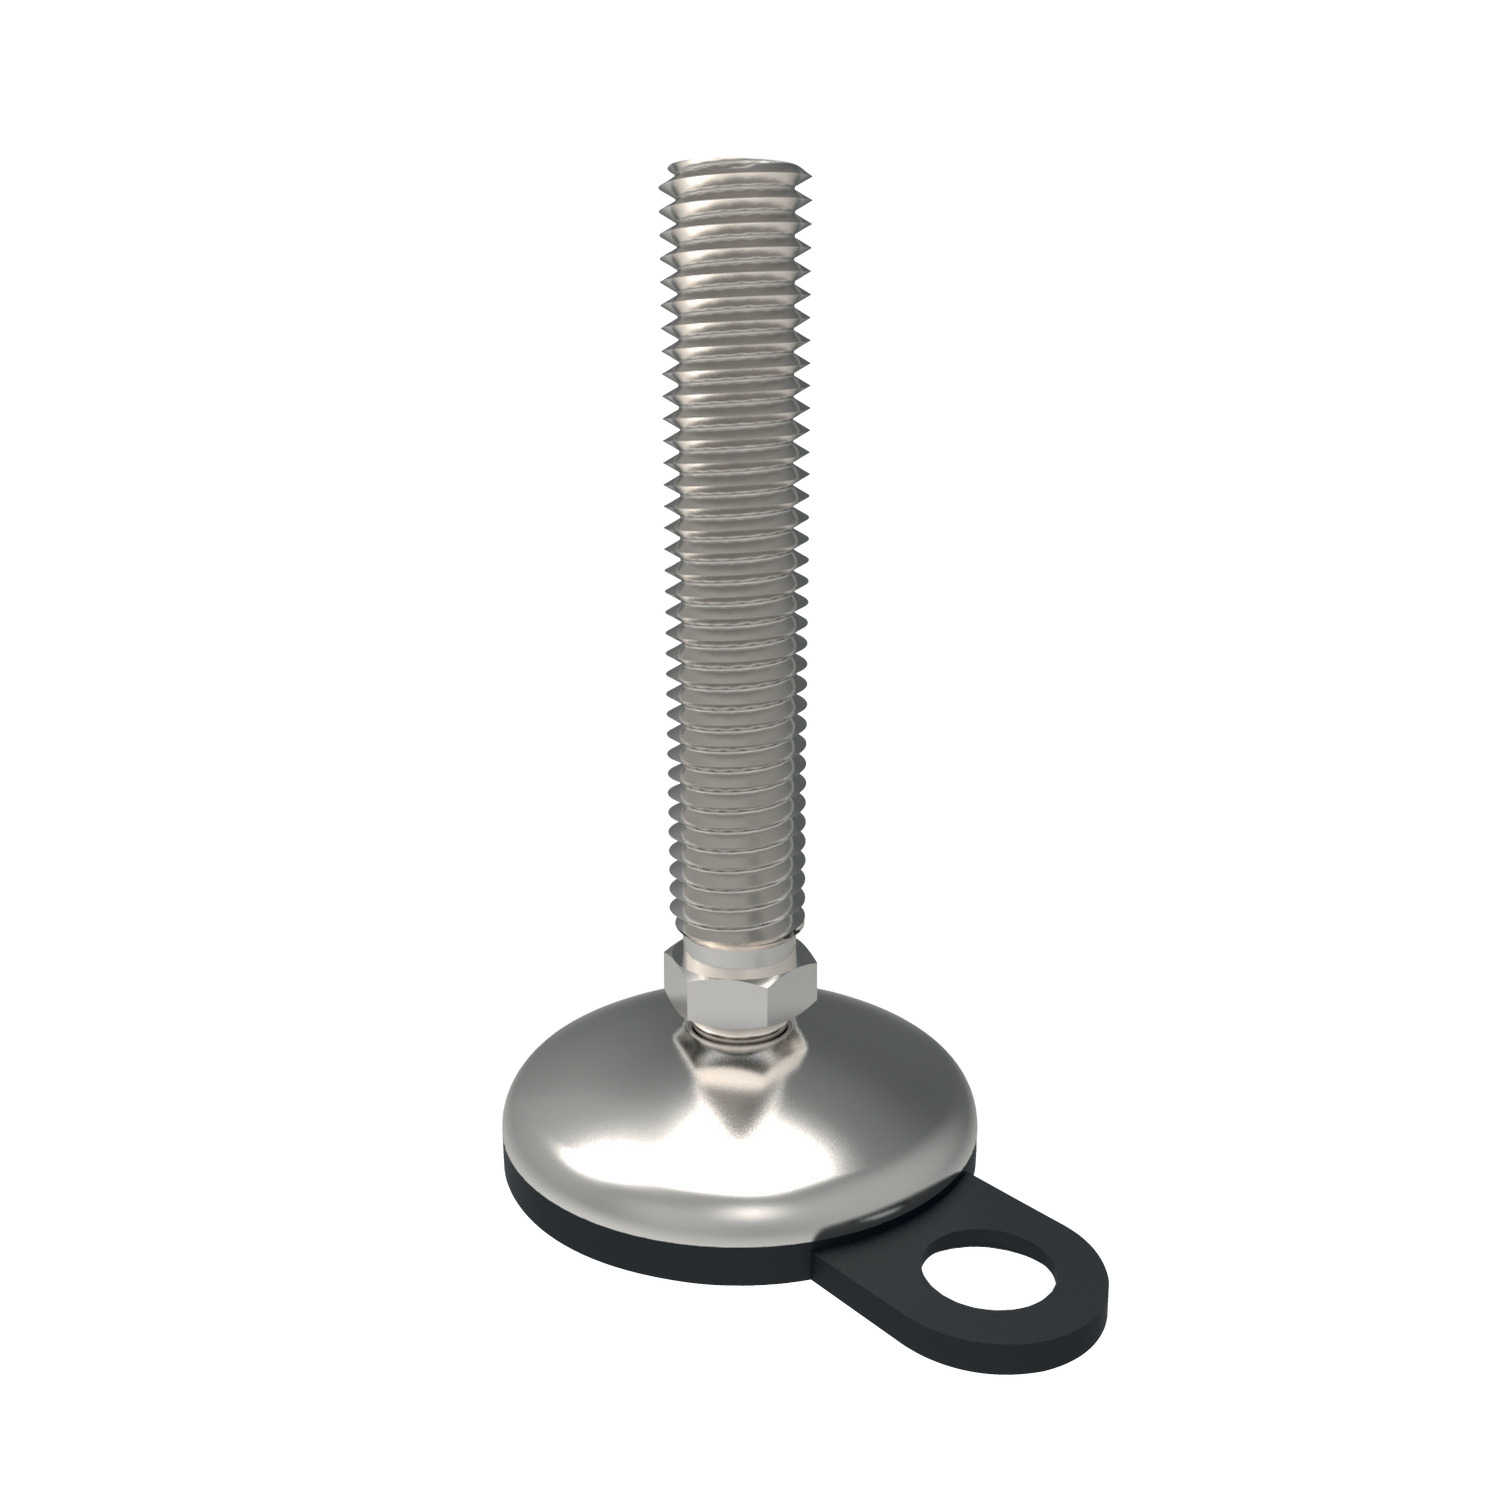 Product 34752, Machine Mount - Bolt Down pad and bolt - stainless steel / 